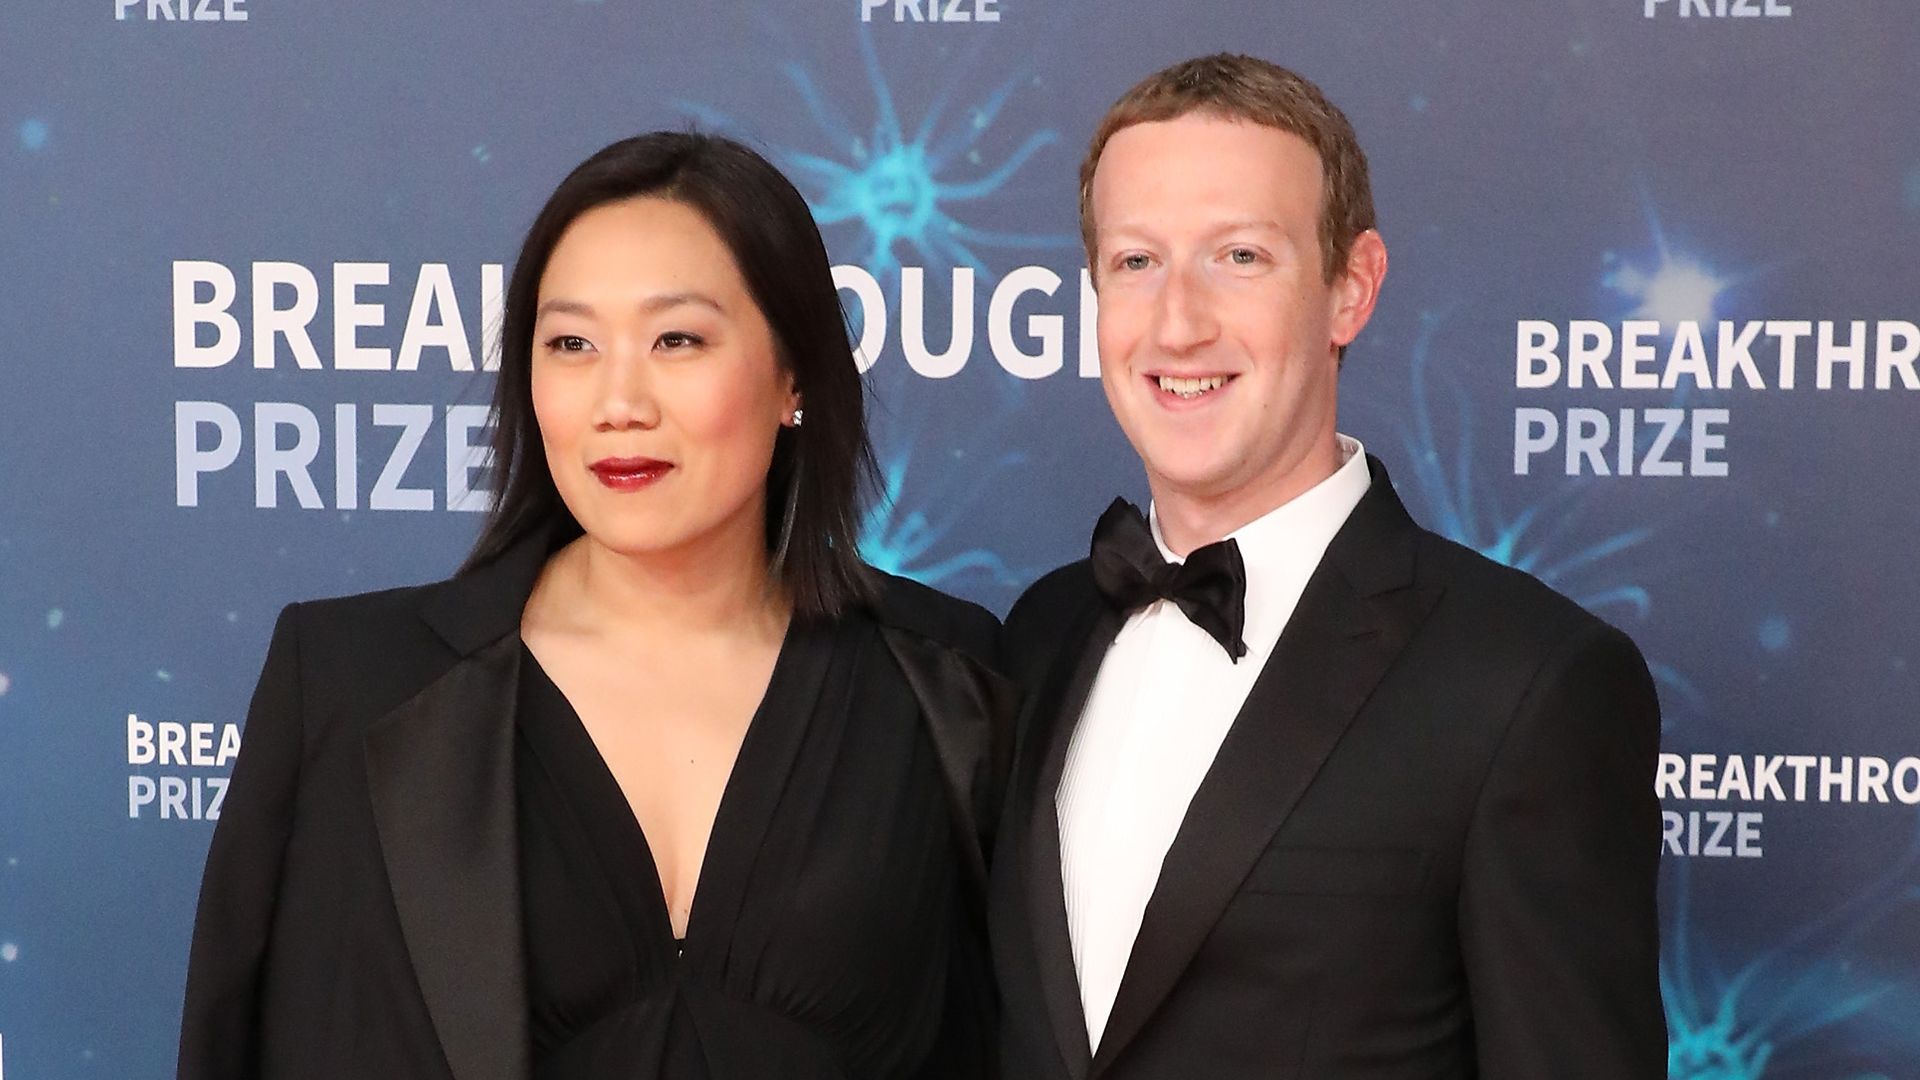 Priscilla Chan and Mark Zuckerberg attend the 2020 Breakthrough Prize Ceremony at NASA Ames Research Center on November 03, 2019 in Mountain View, California